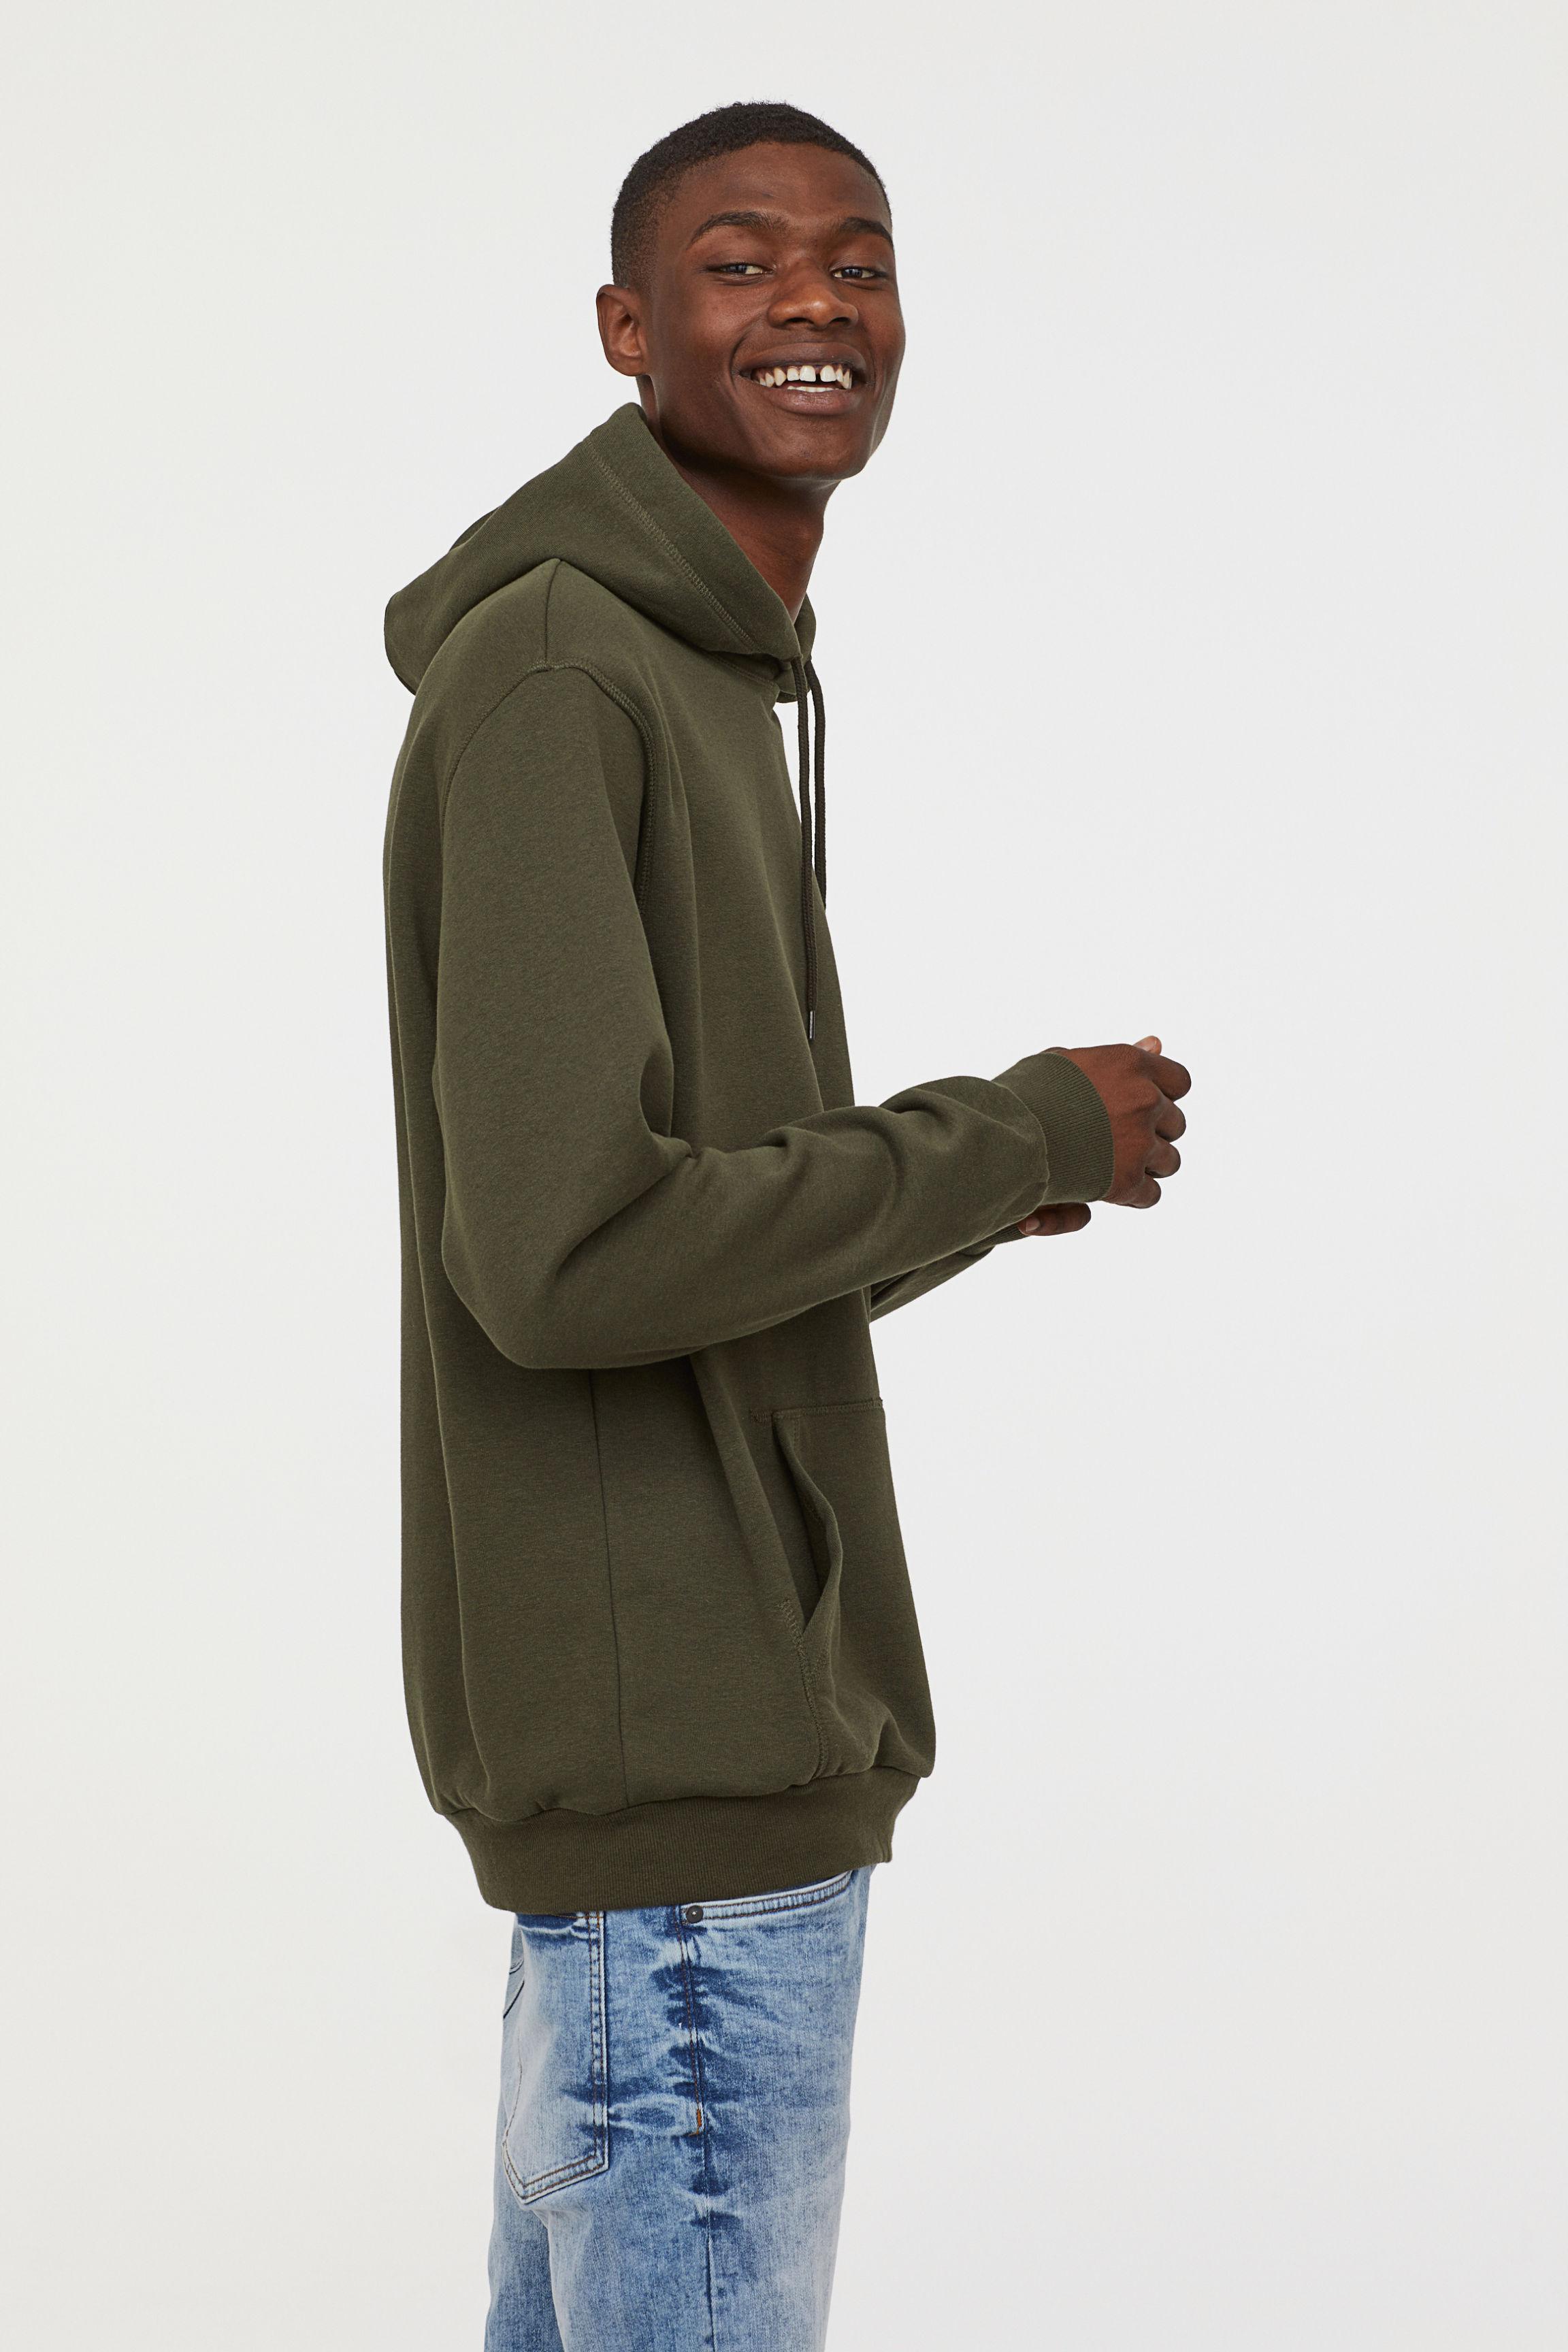 H&M Hooded Top in Green for Men - Lyst